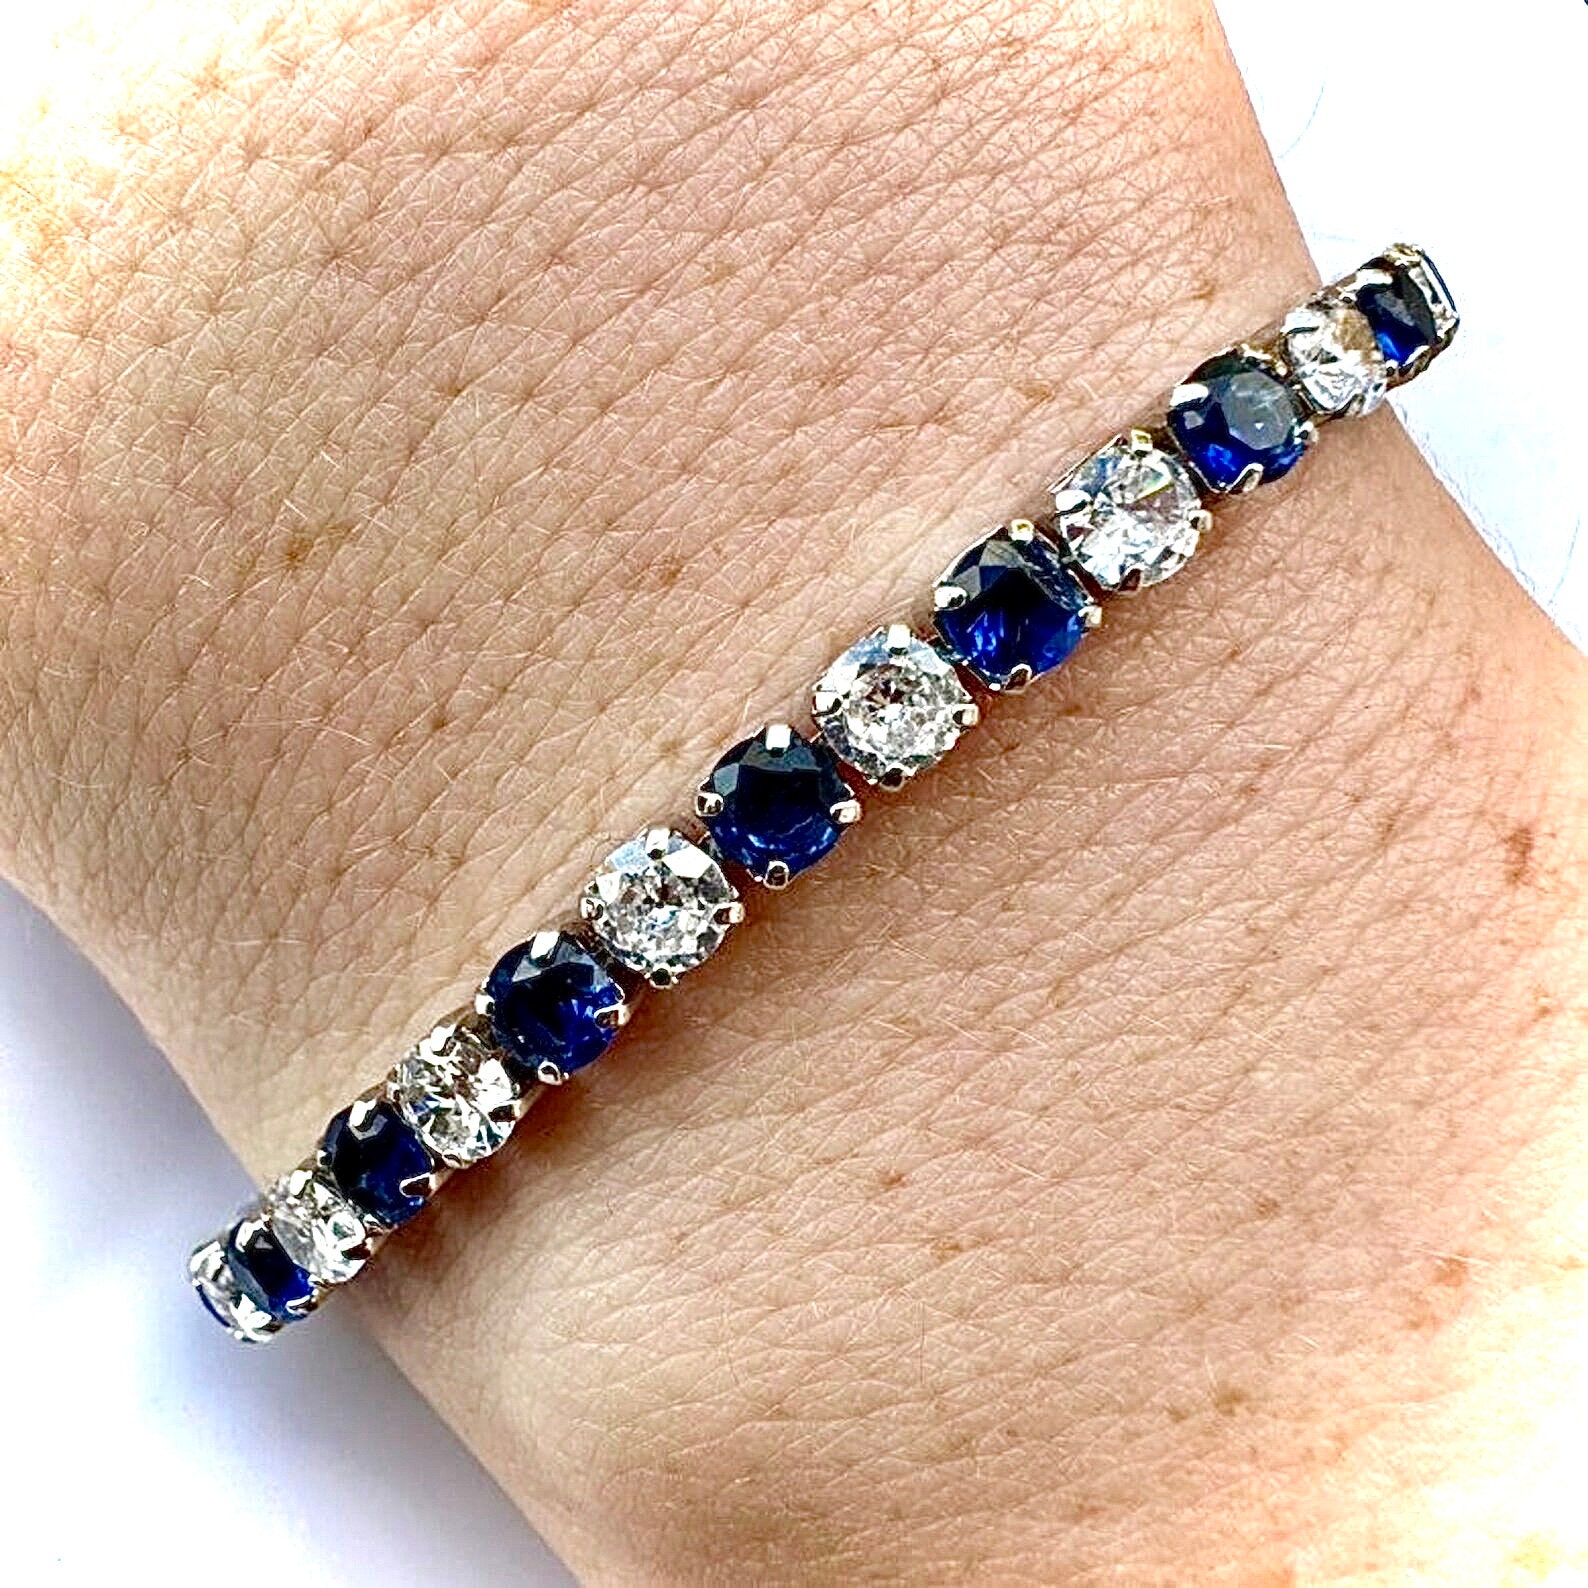 LKBEADS Labradorite & Multi Sapphire 3mm, 54 Pieces rondelle Shape Faceted  Cut Gemstone Beads 7 inch Stacking Bracelet with Silver Plated Lock for  Unisex.#Code- LCBR-3955 : Amazon.in: Jewellery